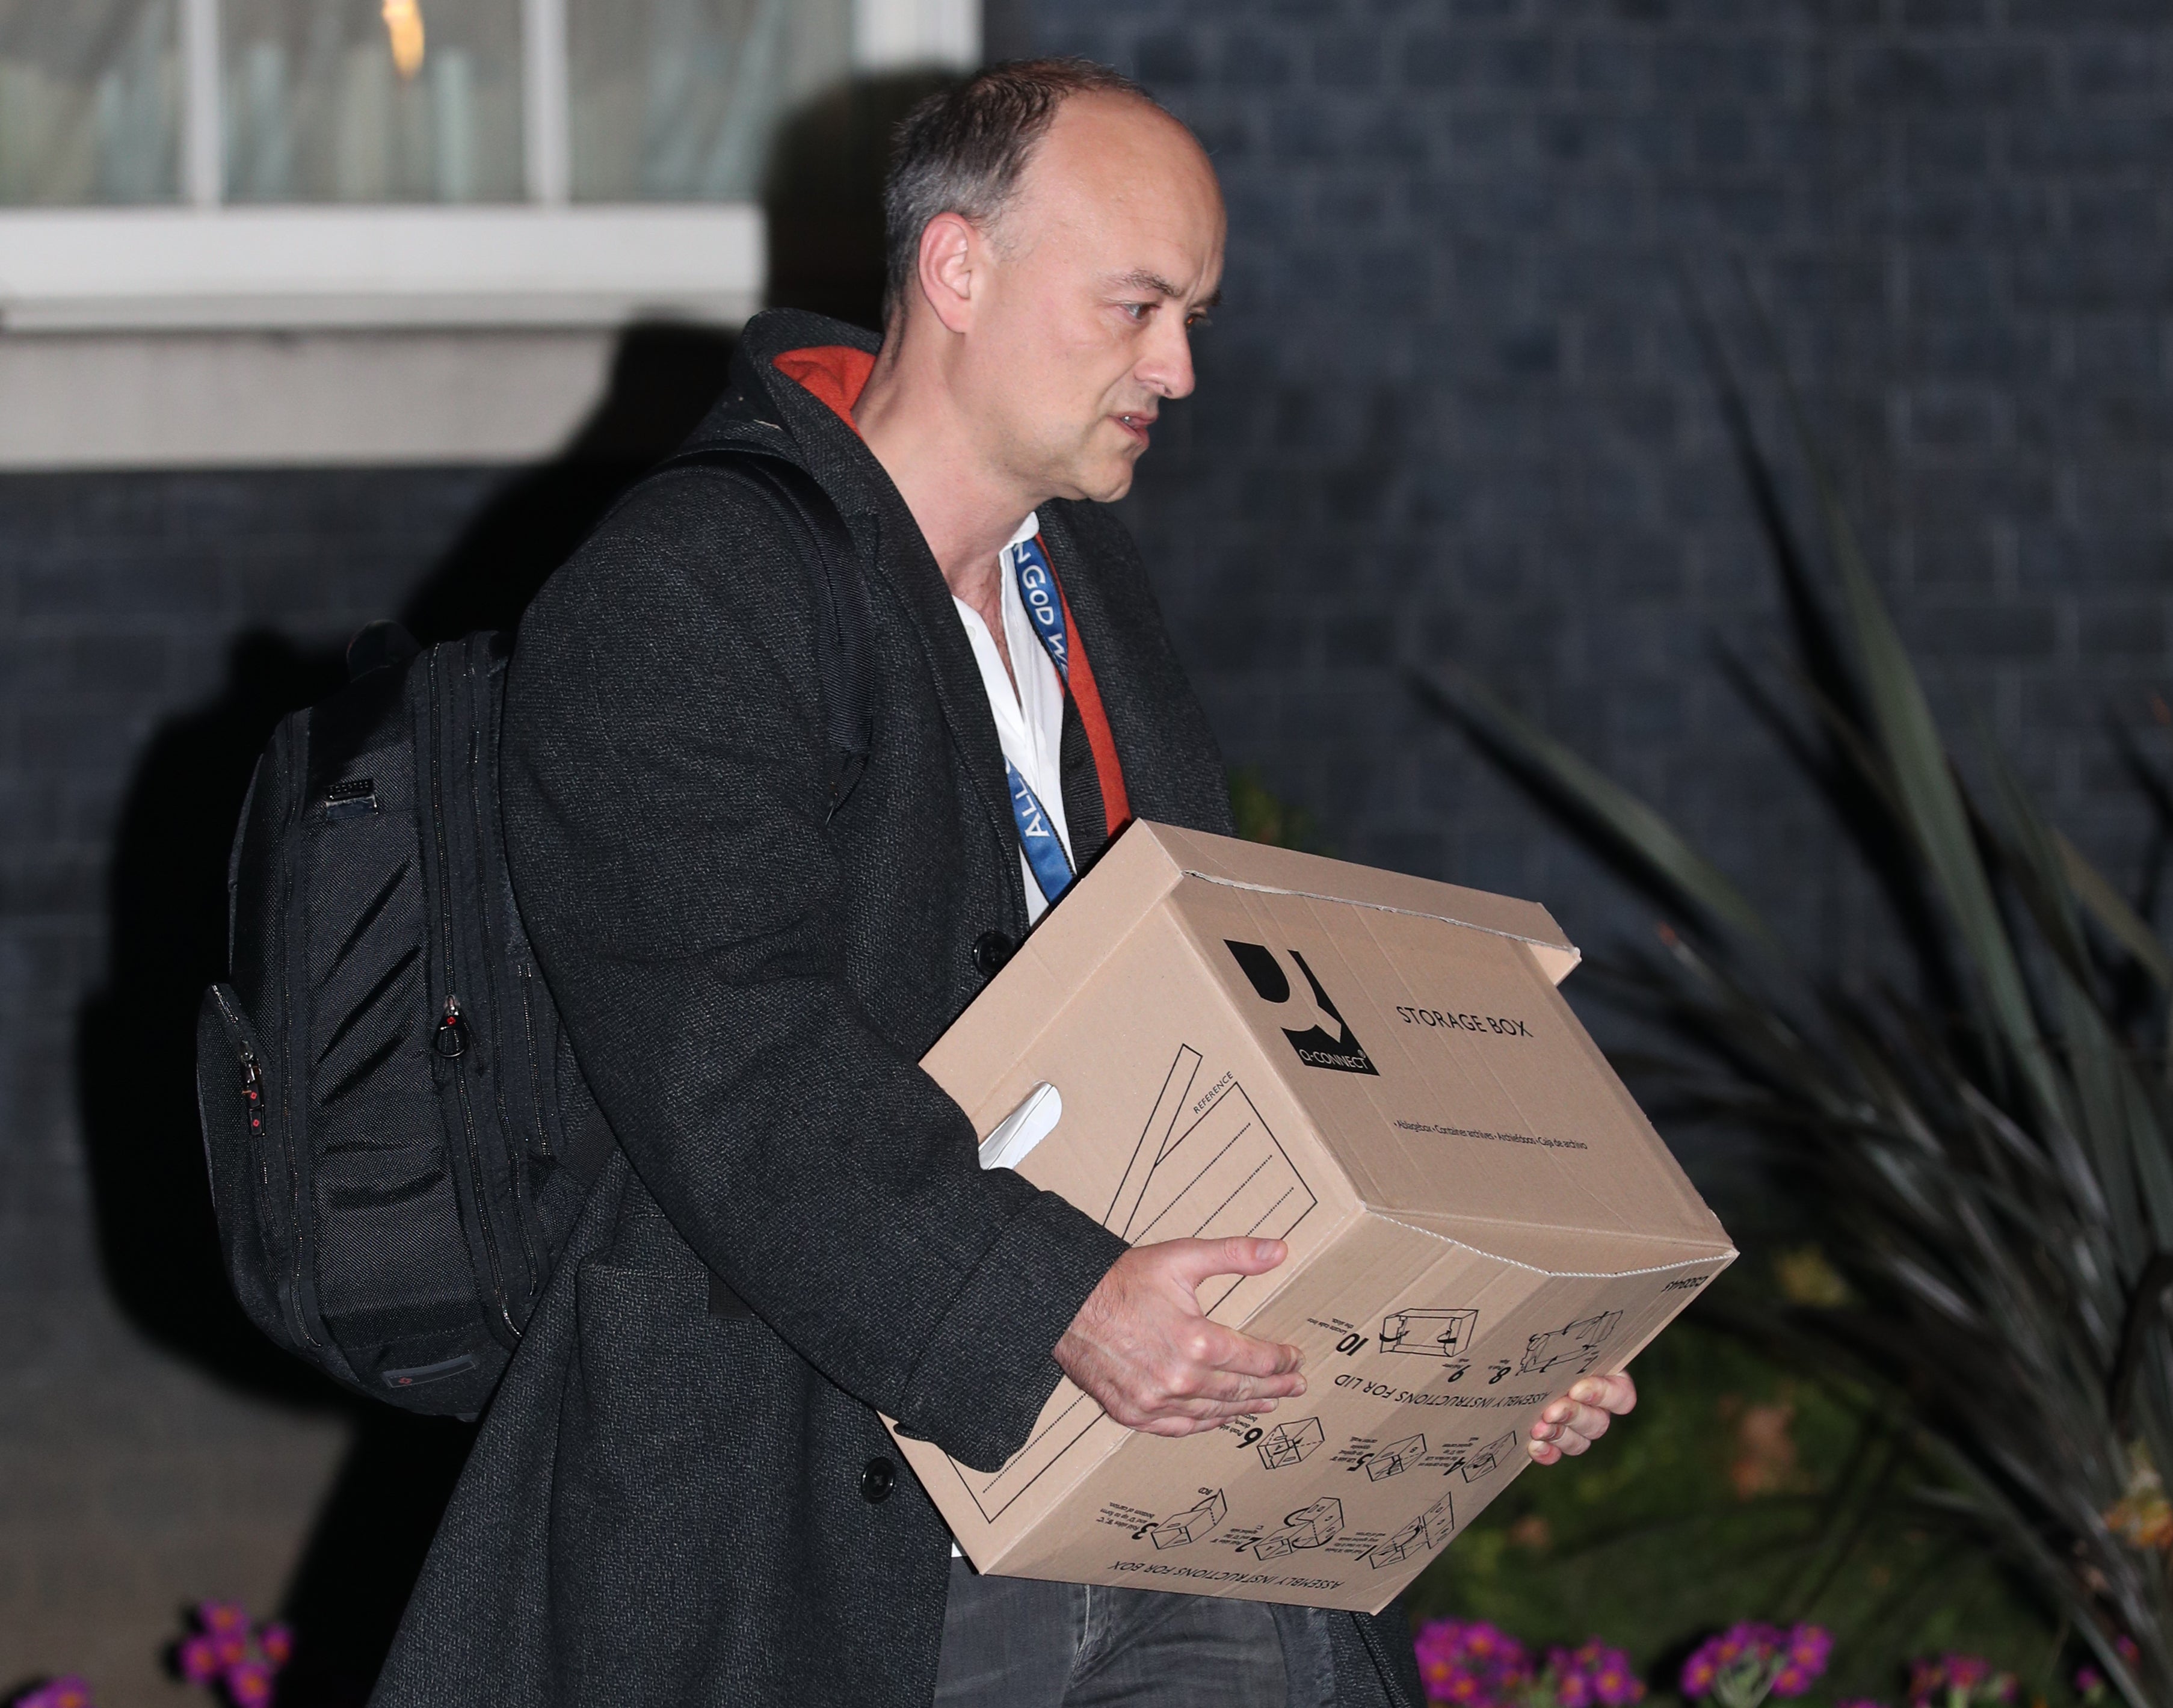 Dominic Cummings leaves 10 Downing Street, London, with a box (Yui Mok/PA)